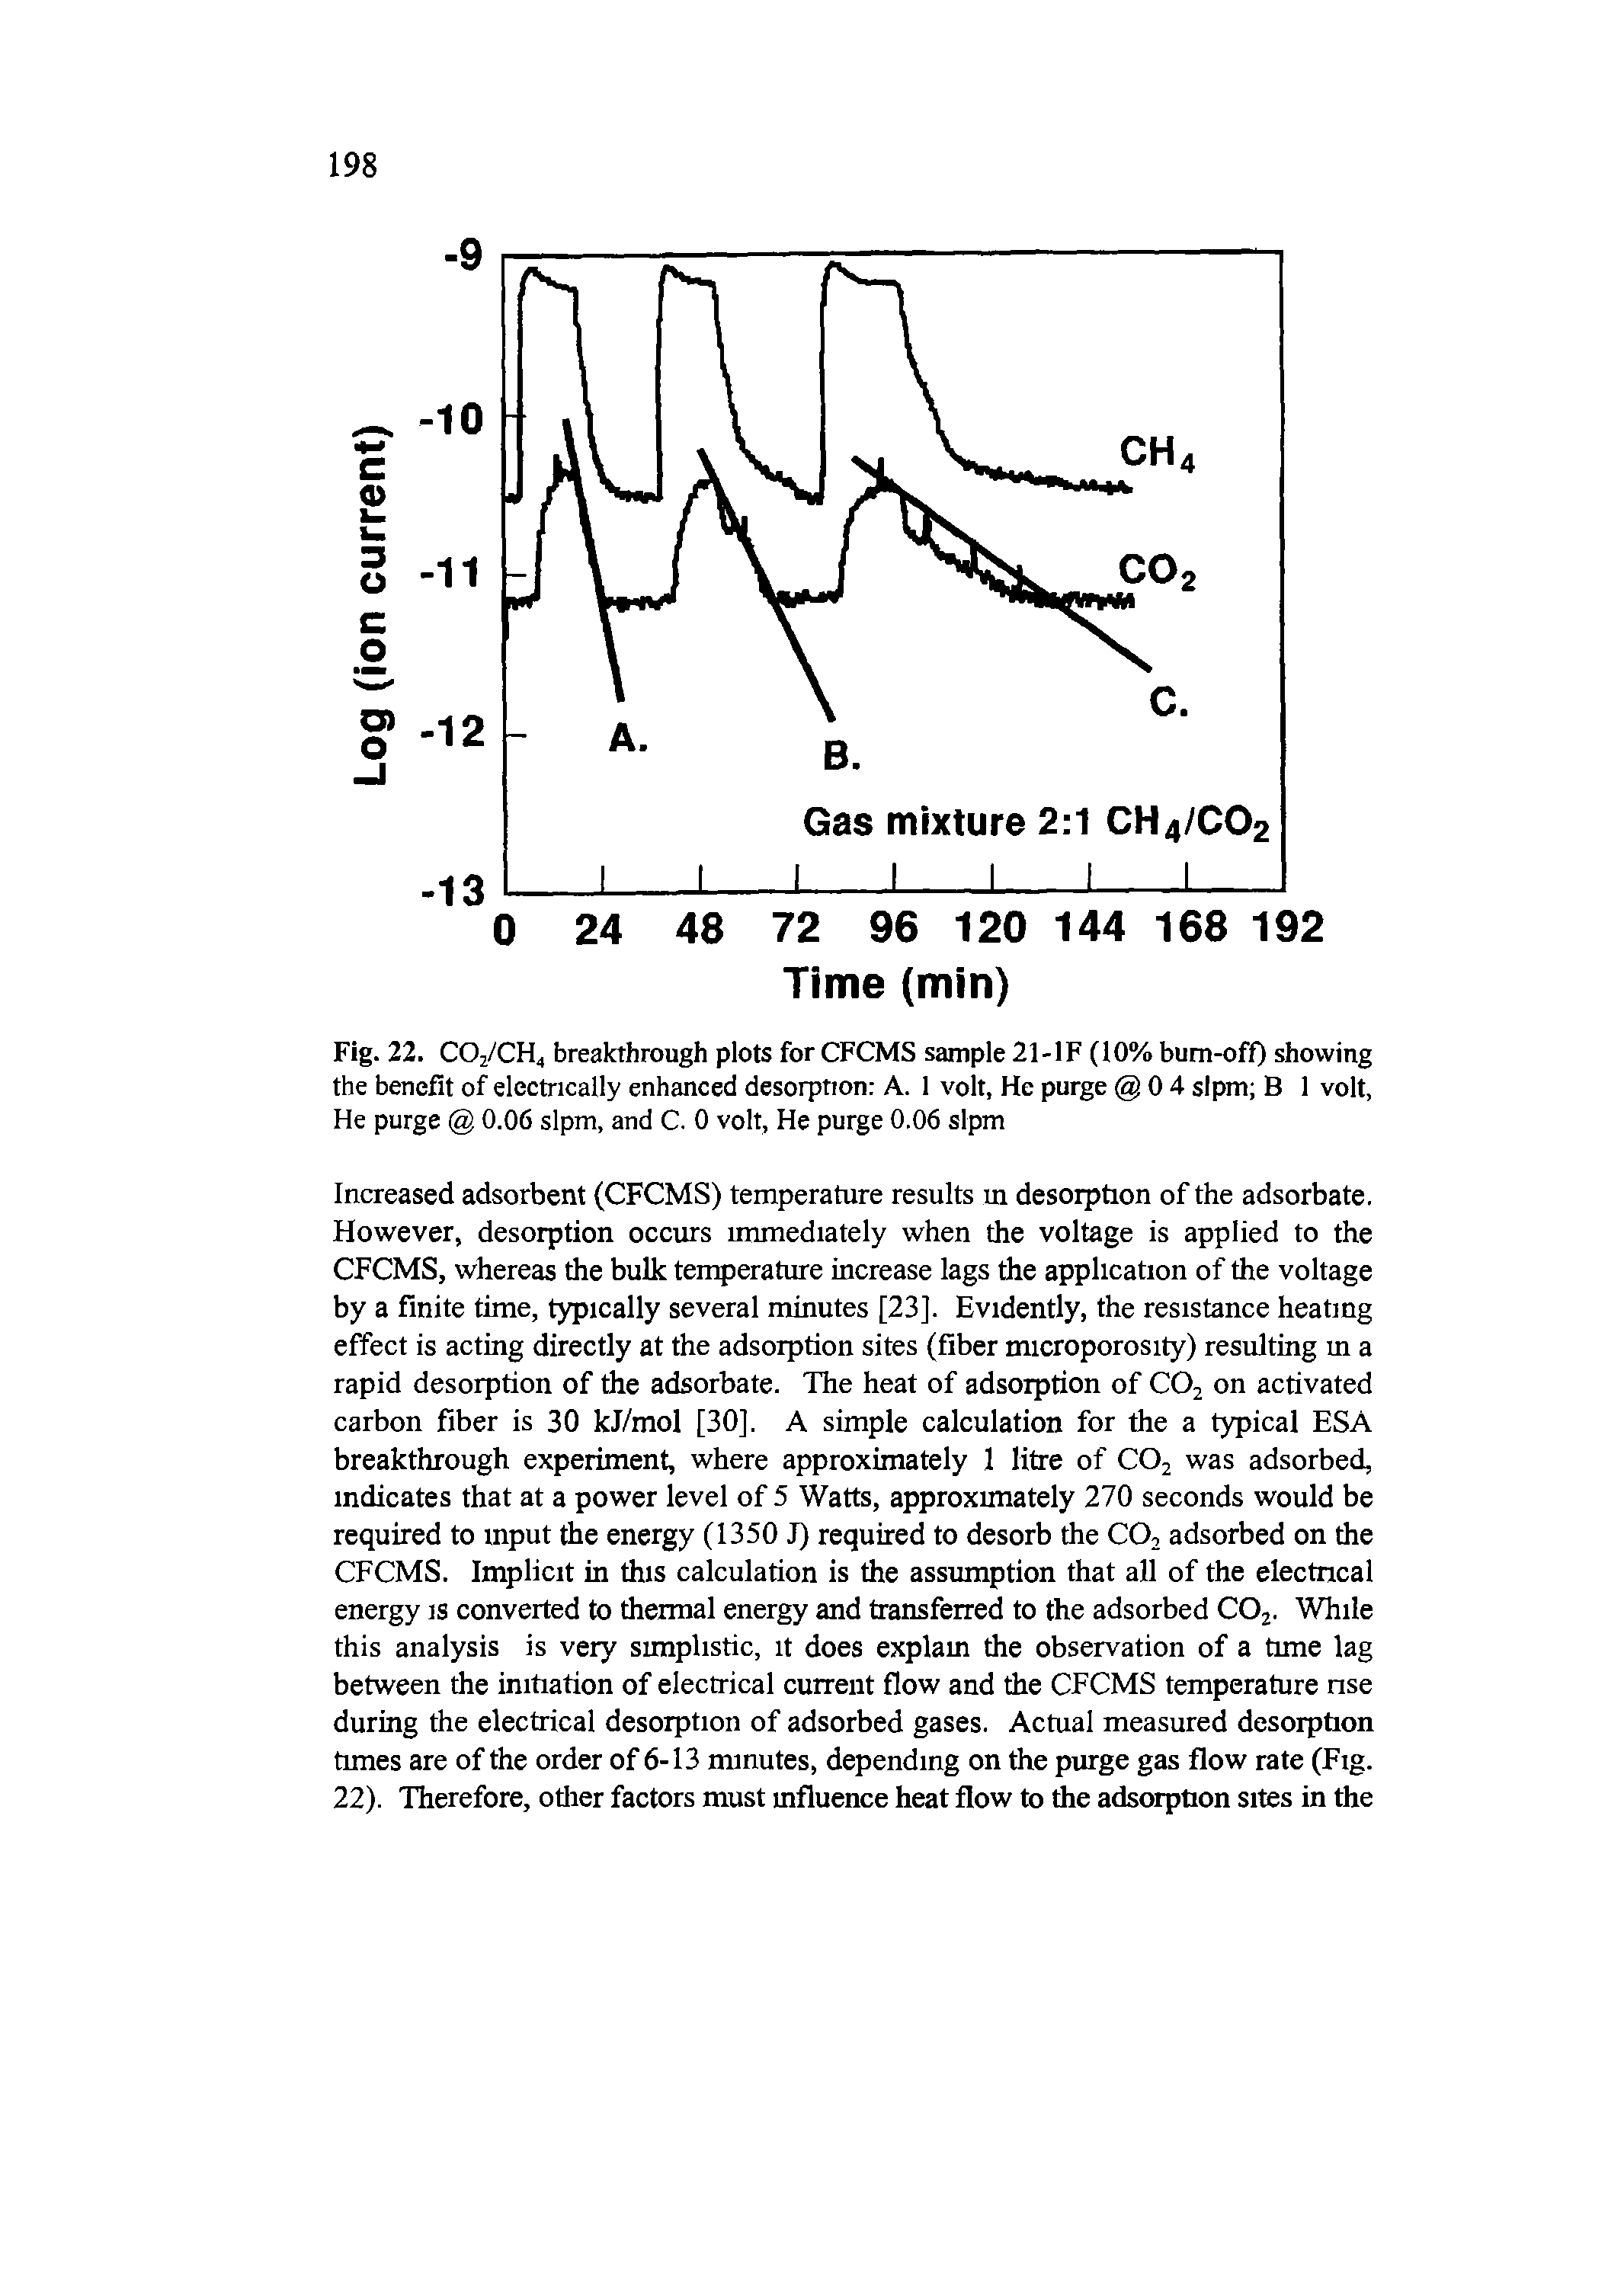 Fig. 22. C02/CH4 breakthrough plots for CFCMS sample 21-1F (10% bum-off) showing the benefit of electrically enhanced desorption A. 1 volt, He purge 04 slpm B 1 volt, He purge 0.06 slpm, and C. 0 volt, He purge 0.06 slpm...